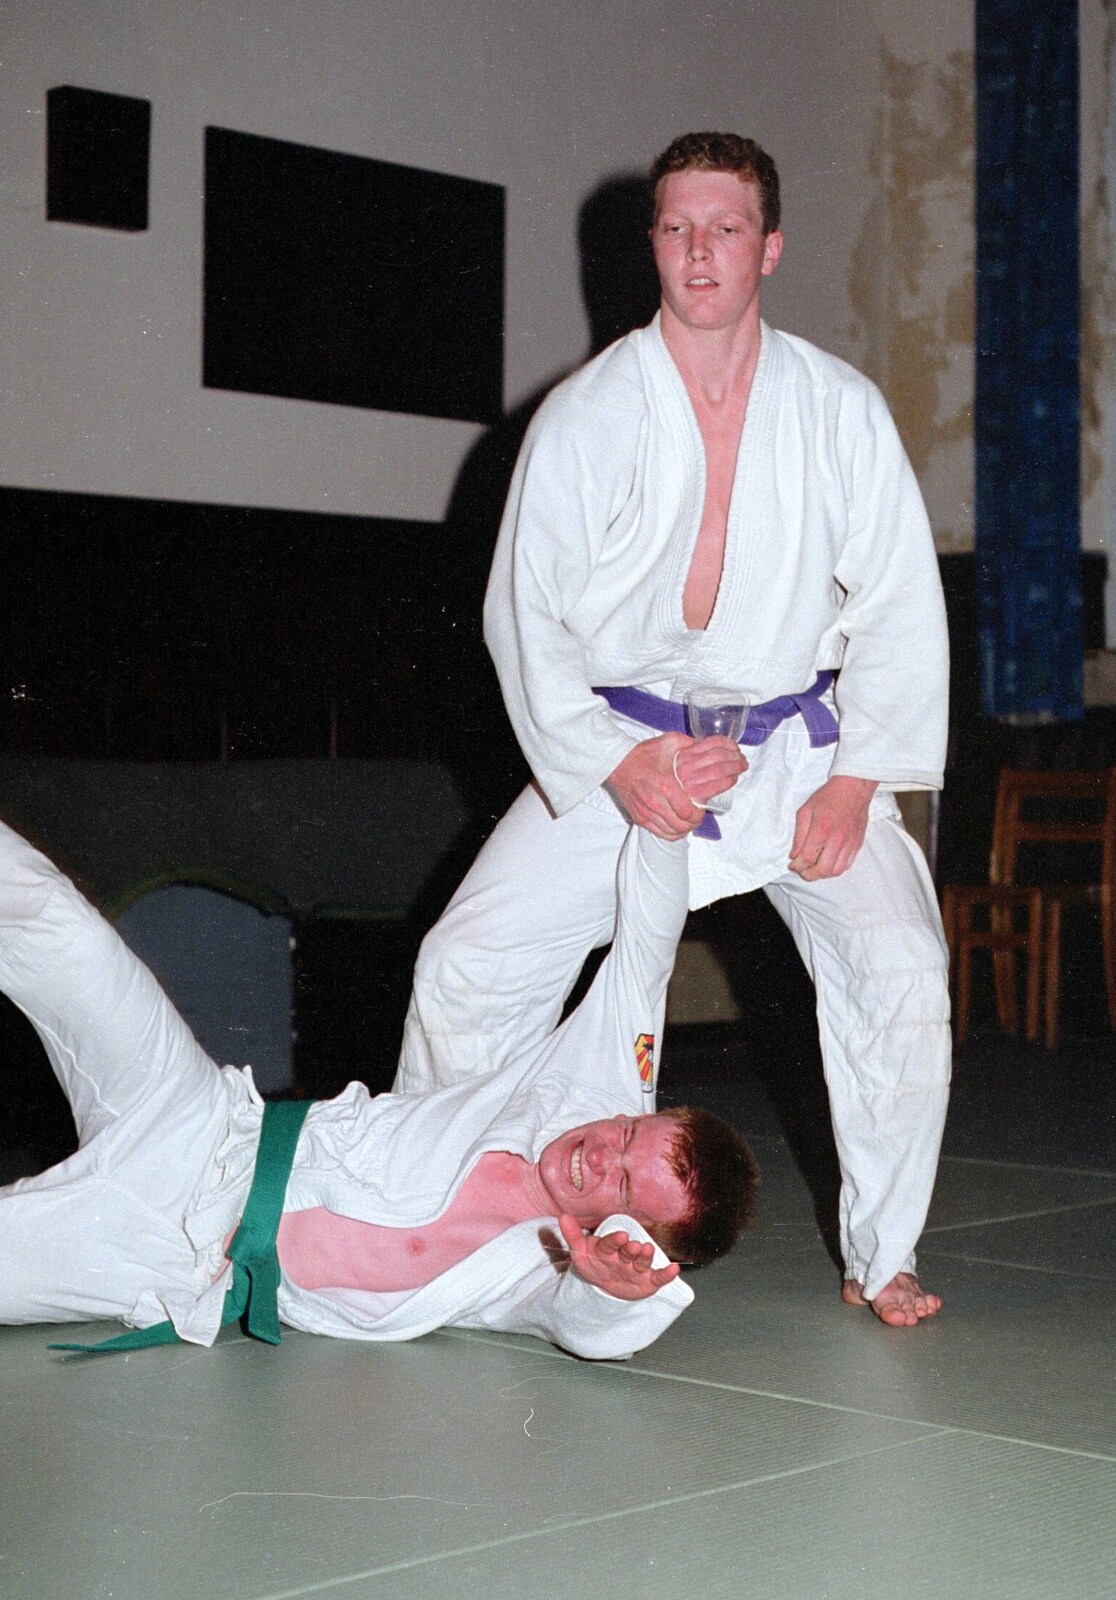 This one looks painful from Uni: Riki's Barbeque and Dobbs' Jitsu, Plymouth, Devon - 2nd June 1989